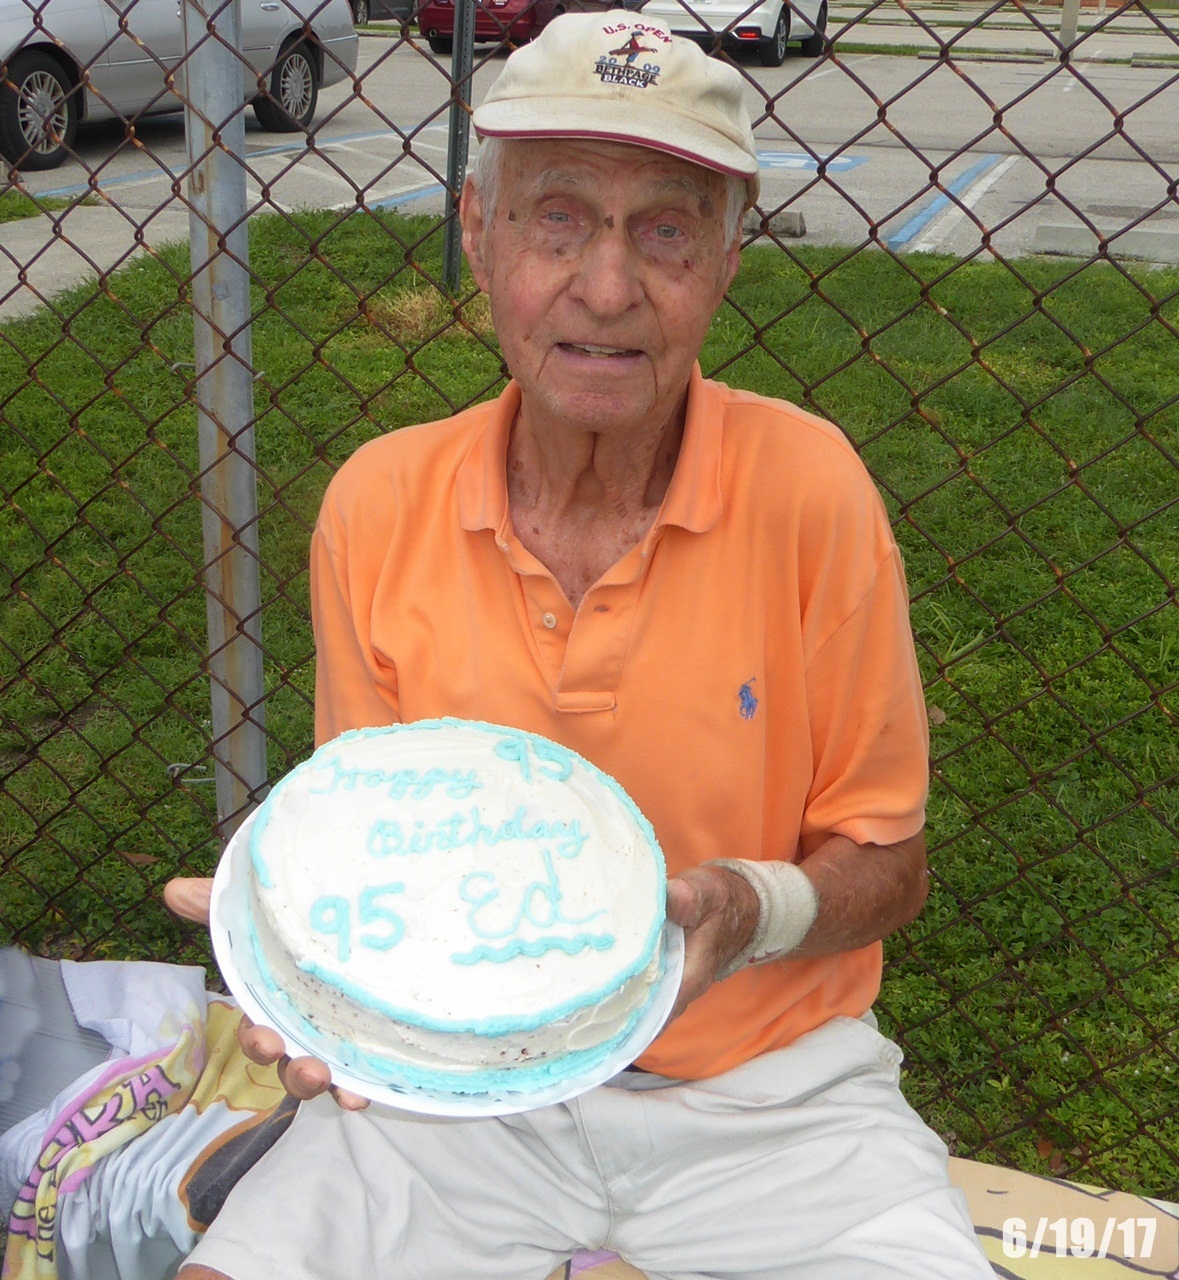 Ed loved tennis. This is he at Rutenberg tennis courts in Fort Myers, FL.  He played there for years with a tennis group that plays Monday, Wednesday, and Friday mornings. He hardly ever missed. I remember him saying, "I hope we can play tennis up in Heaven." This is his last birthday celebrated at Rutenberg (his 95th). He gave tennis up sometime after that and not because he wanted to.....because he was afraid of falling. HOPE YOU ARE PLAYING TENNIS UP THERE ED!